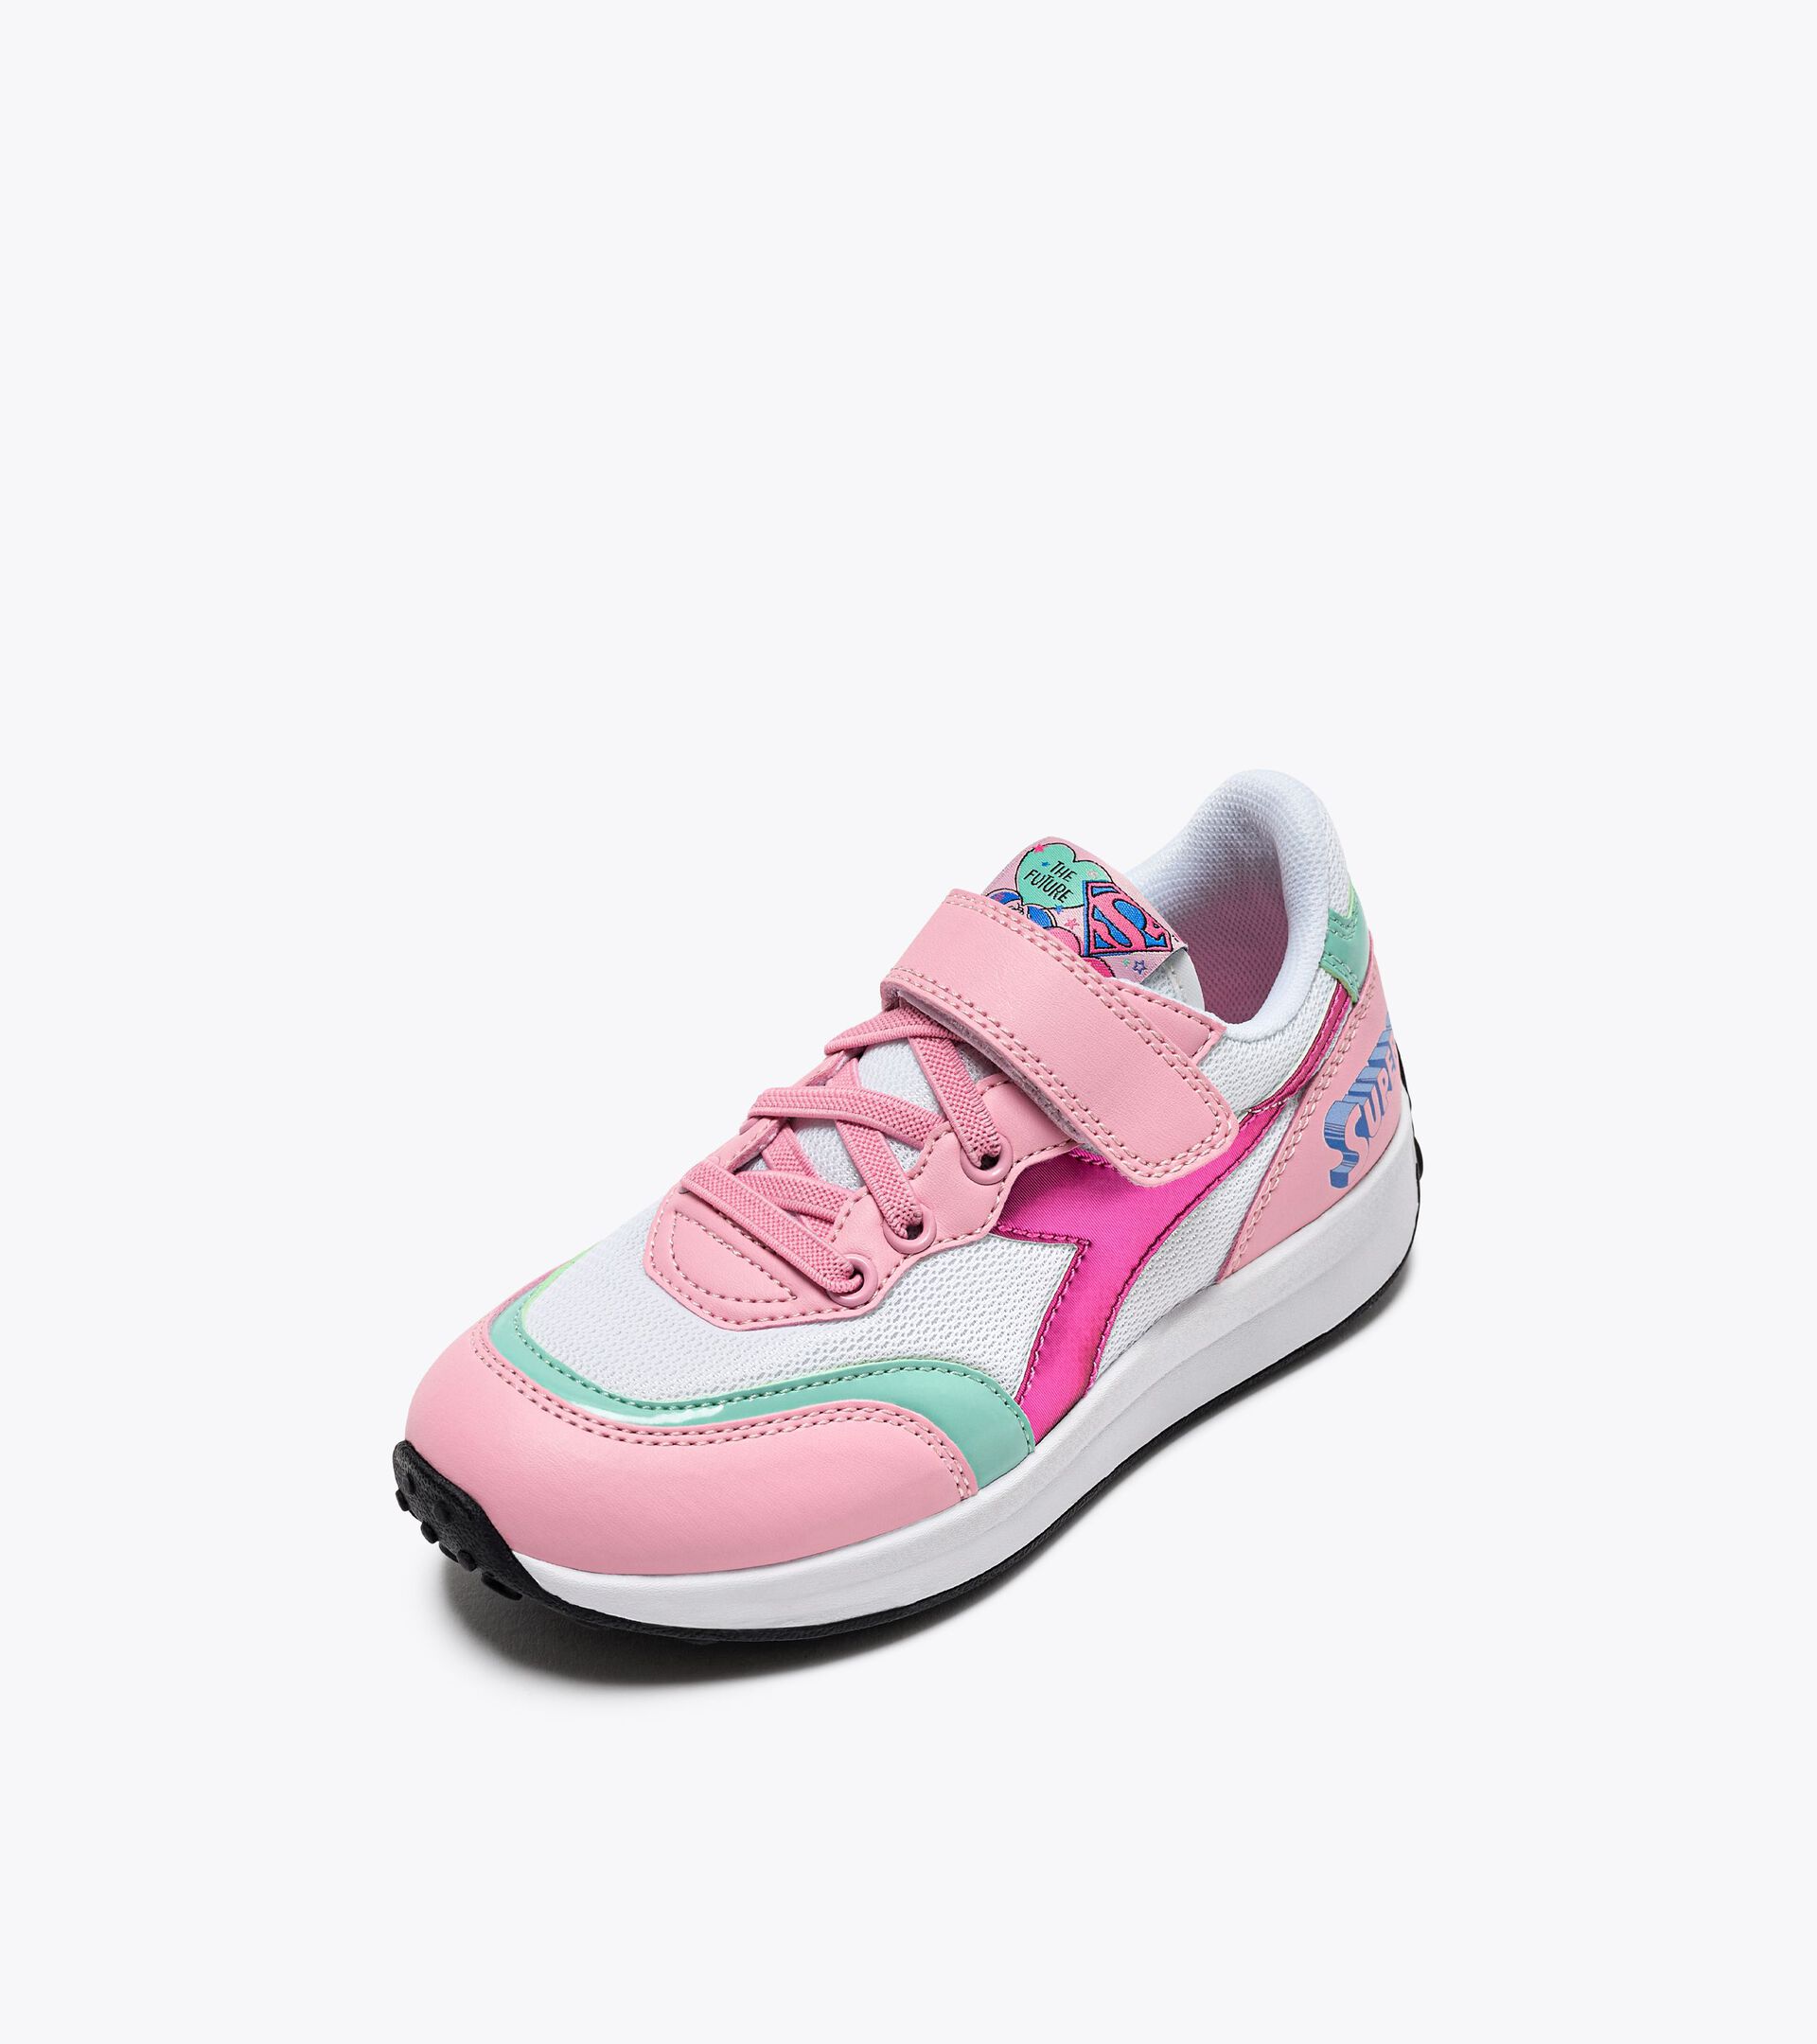 Sports sneaker - Girls - 4 to 8 years old  RACE PS SUPERGIRL CANDY PINK/HOT PINK - Diadora